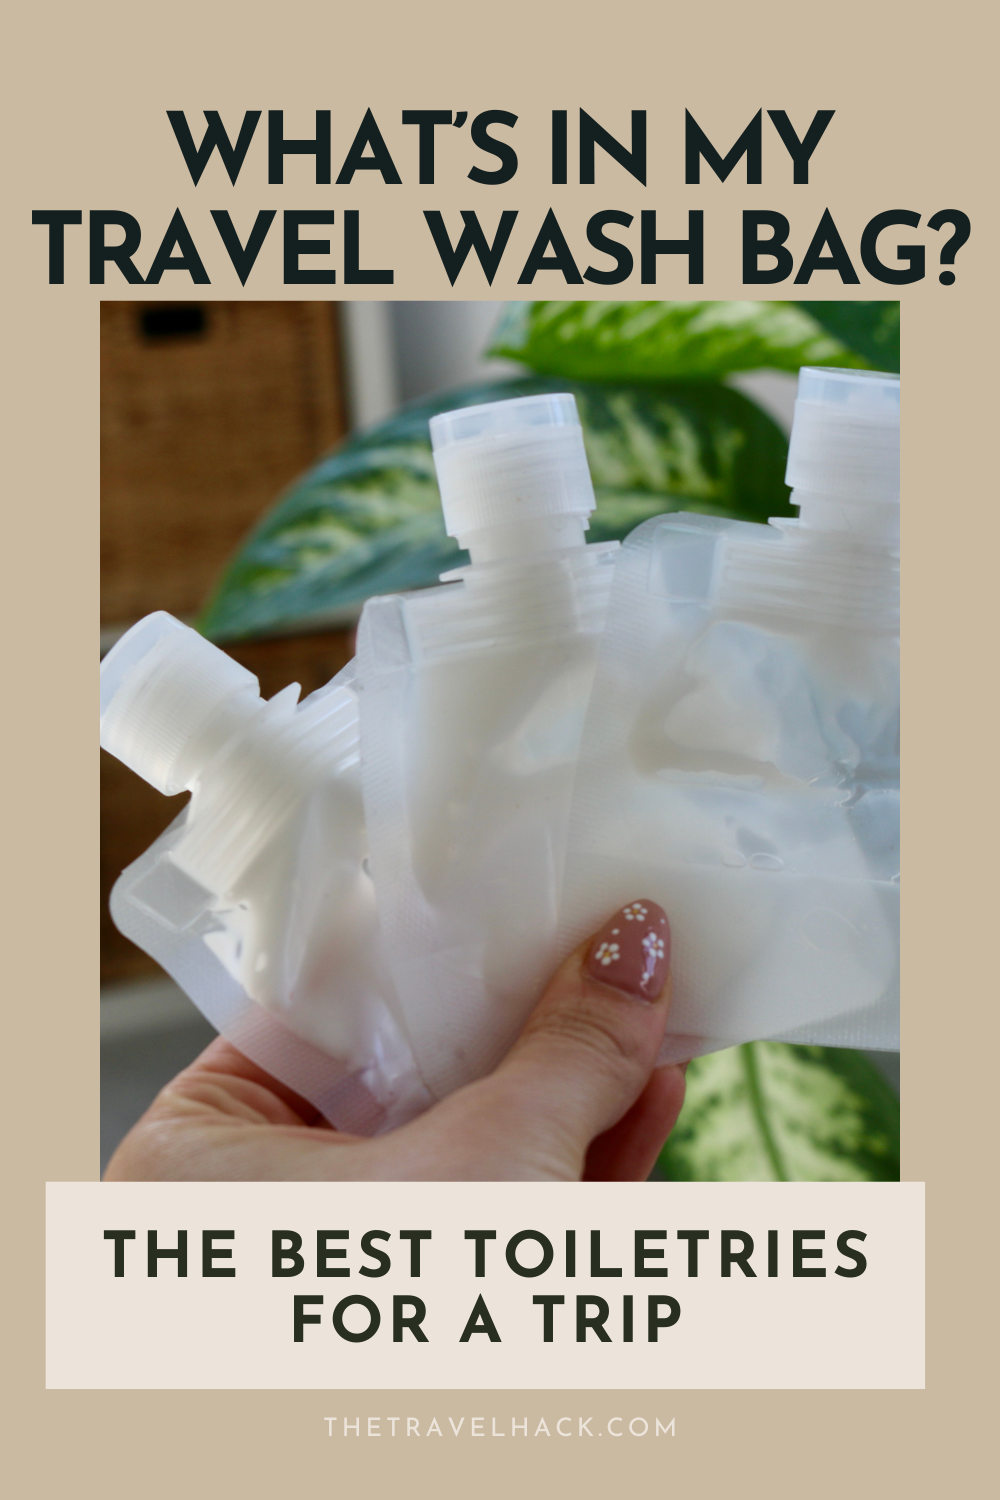 The best toiletries for a trip